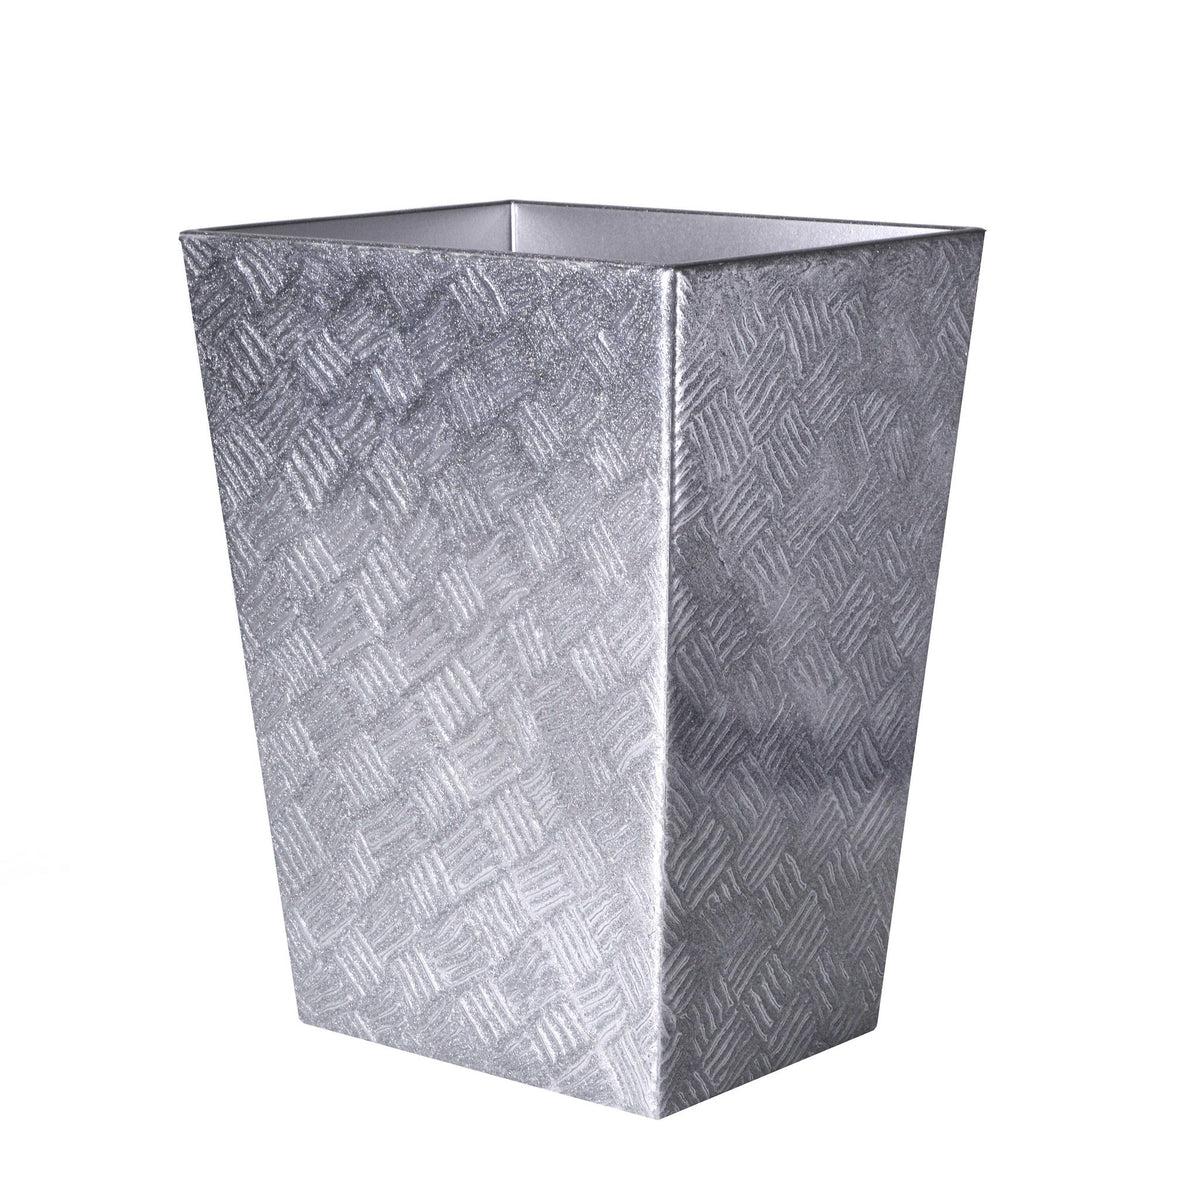 Mike and Ally Tilly Bath Accessories Metallic Silver Waste Basket